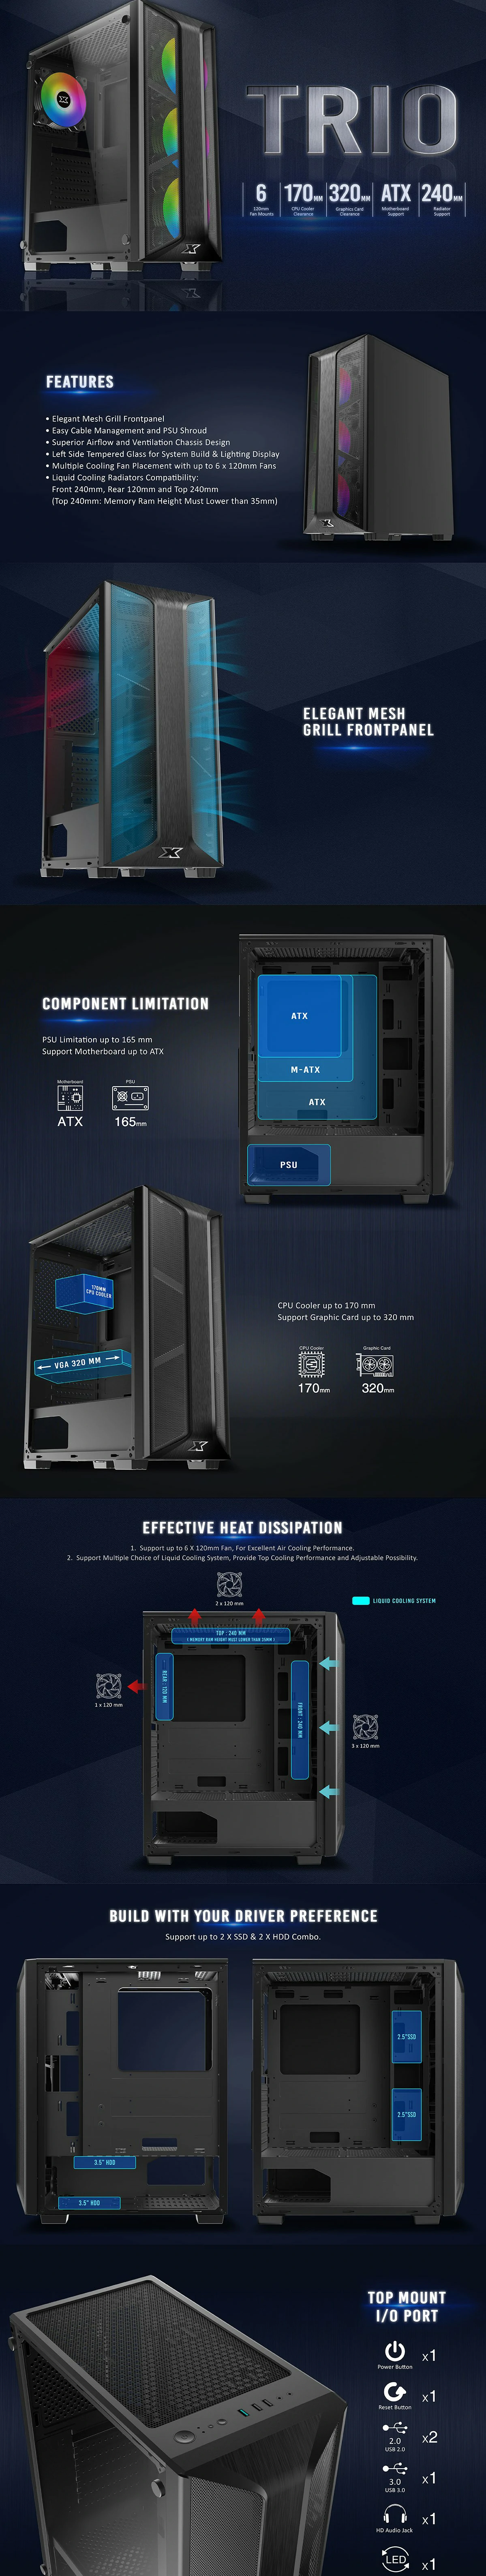 Overview - Specifications - Xigmatek - Trio - Tempered Glass ARGB Mid Tower Chassis